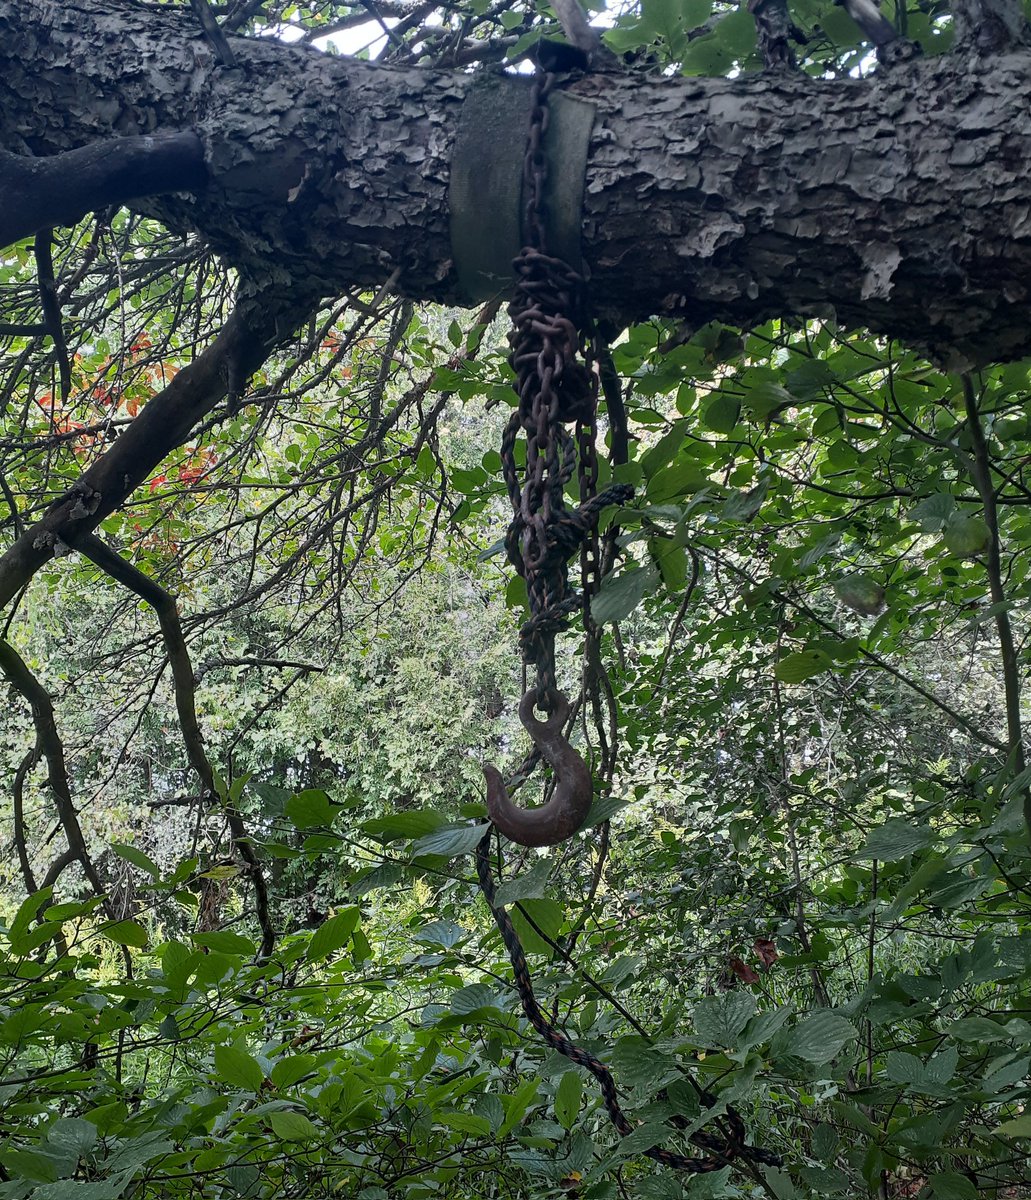 When I was a dumb teen I had a punching bag (actually just an old Army duffelbag filled with sand + gravel) & it's gone but this hook/chain/rope deal is still there to remind me that I was an idiot guy ('that poor apple tree')